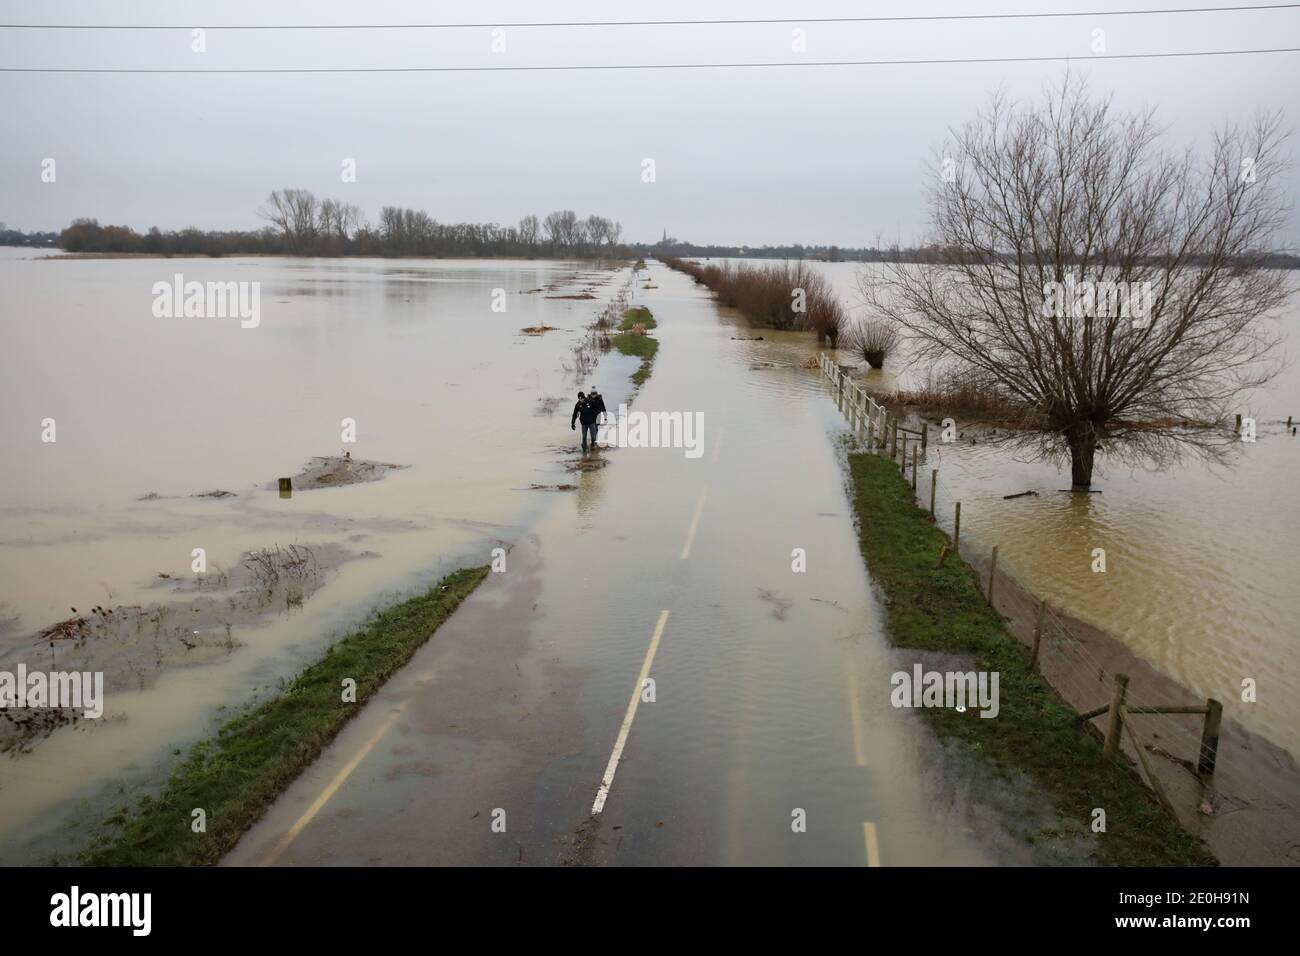 Whittlesey, UK. 29th Dec, 2020. People manage to walk along high parts of the road verge as floodwater has forced the closure of this road near Whittlesey, Cambridgeshire, after the River Nene burst its banks last week, and excess water is now sitting on the flood plains. Credit: Paul Marriott/Alamy Live News Stock Photo